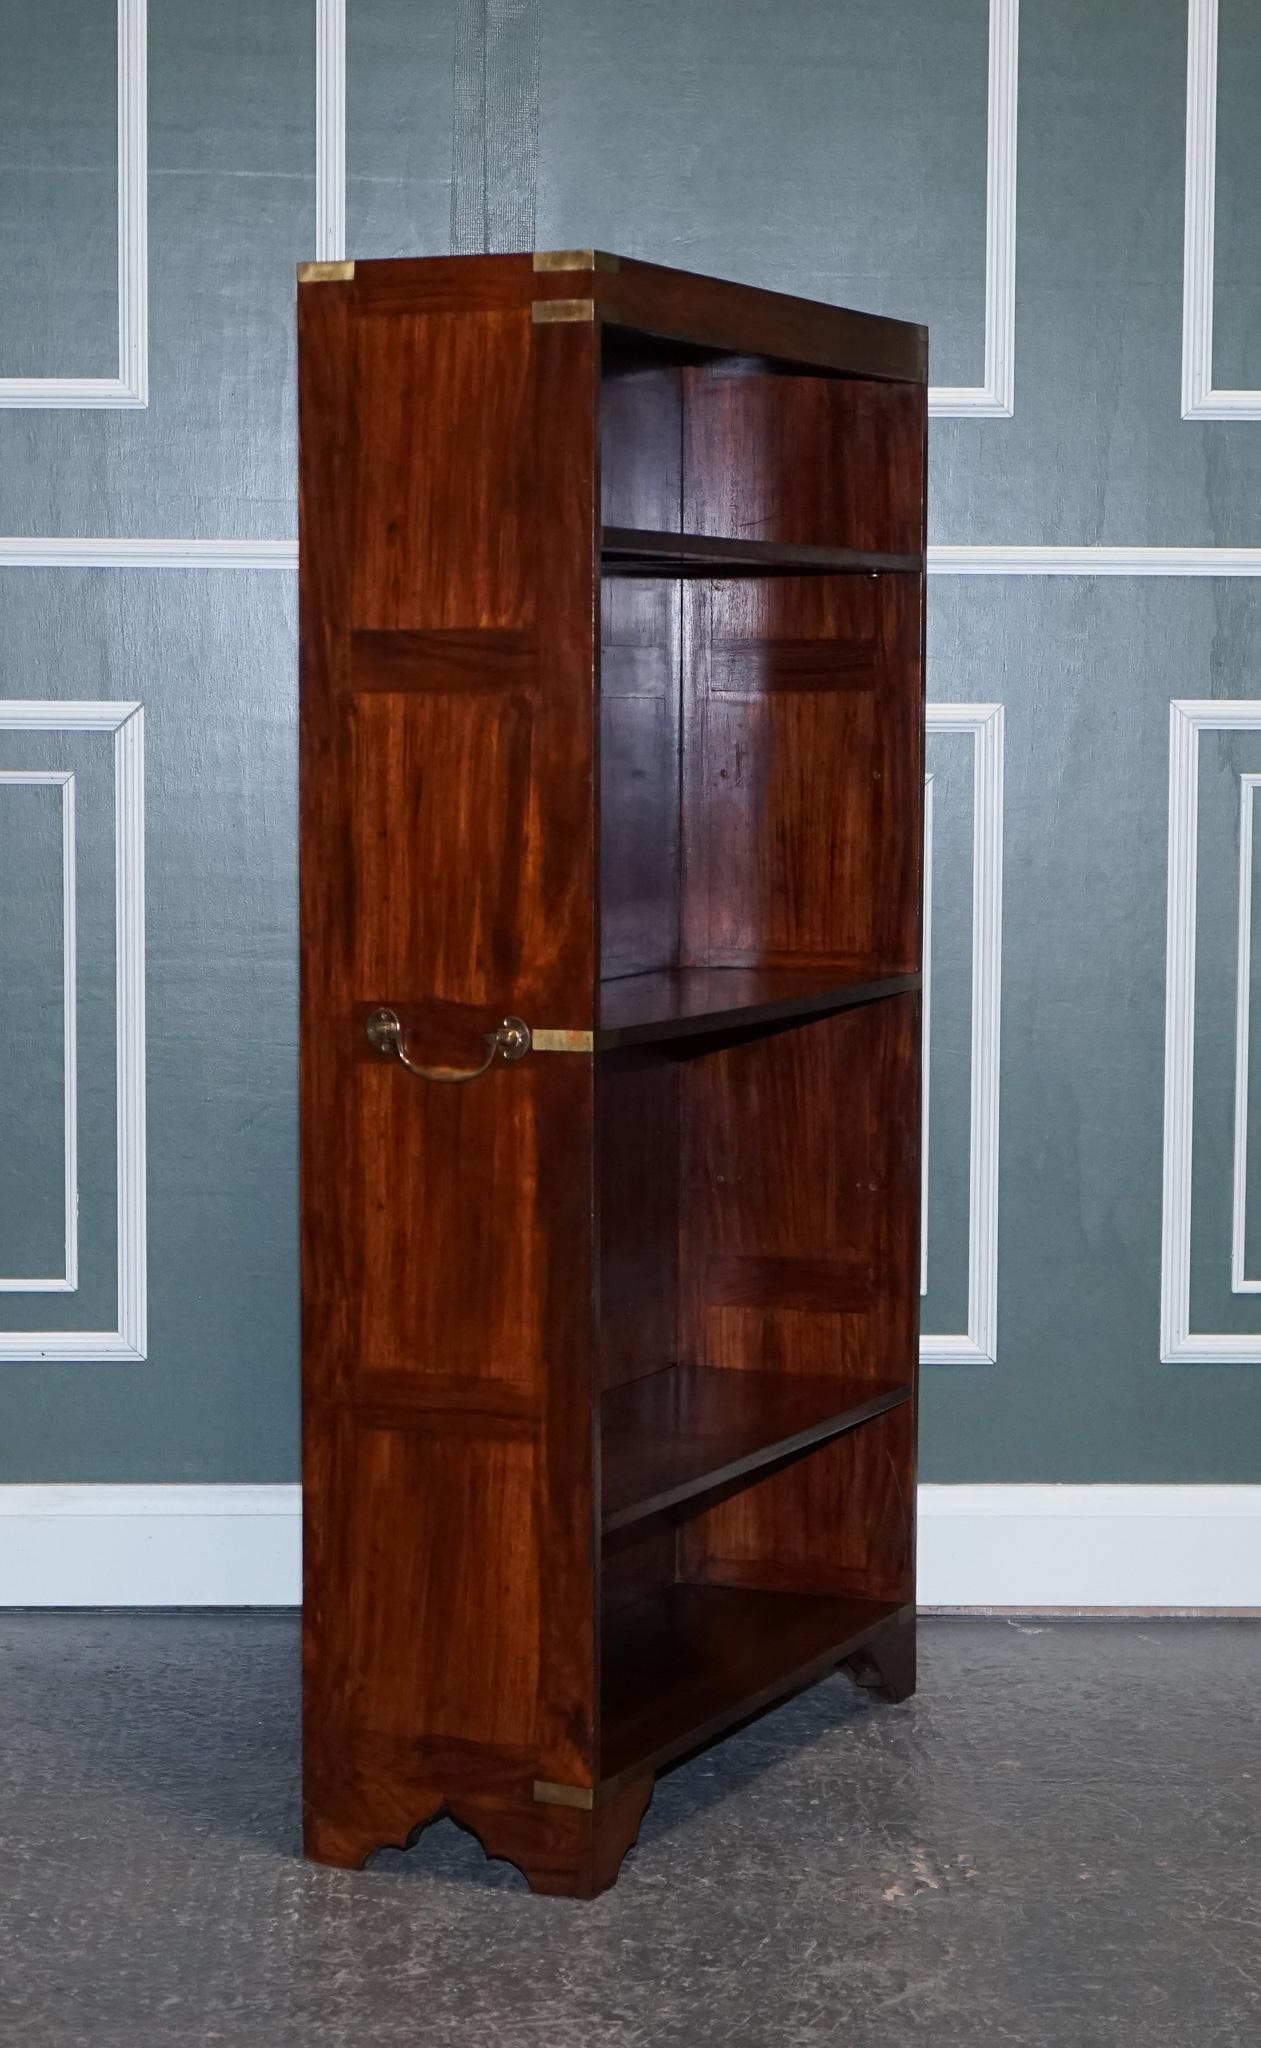 STUNNING MILITARY CAMPAIGN OPEN BOOKCASE WiTH ADJUSTABLE SHELVES 2